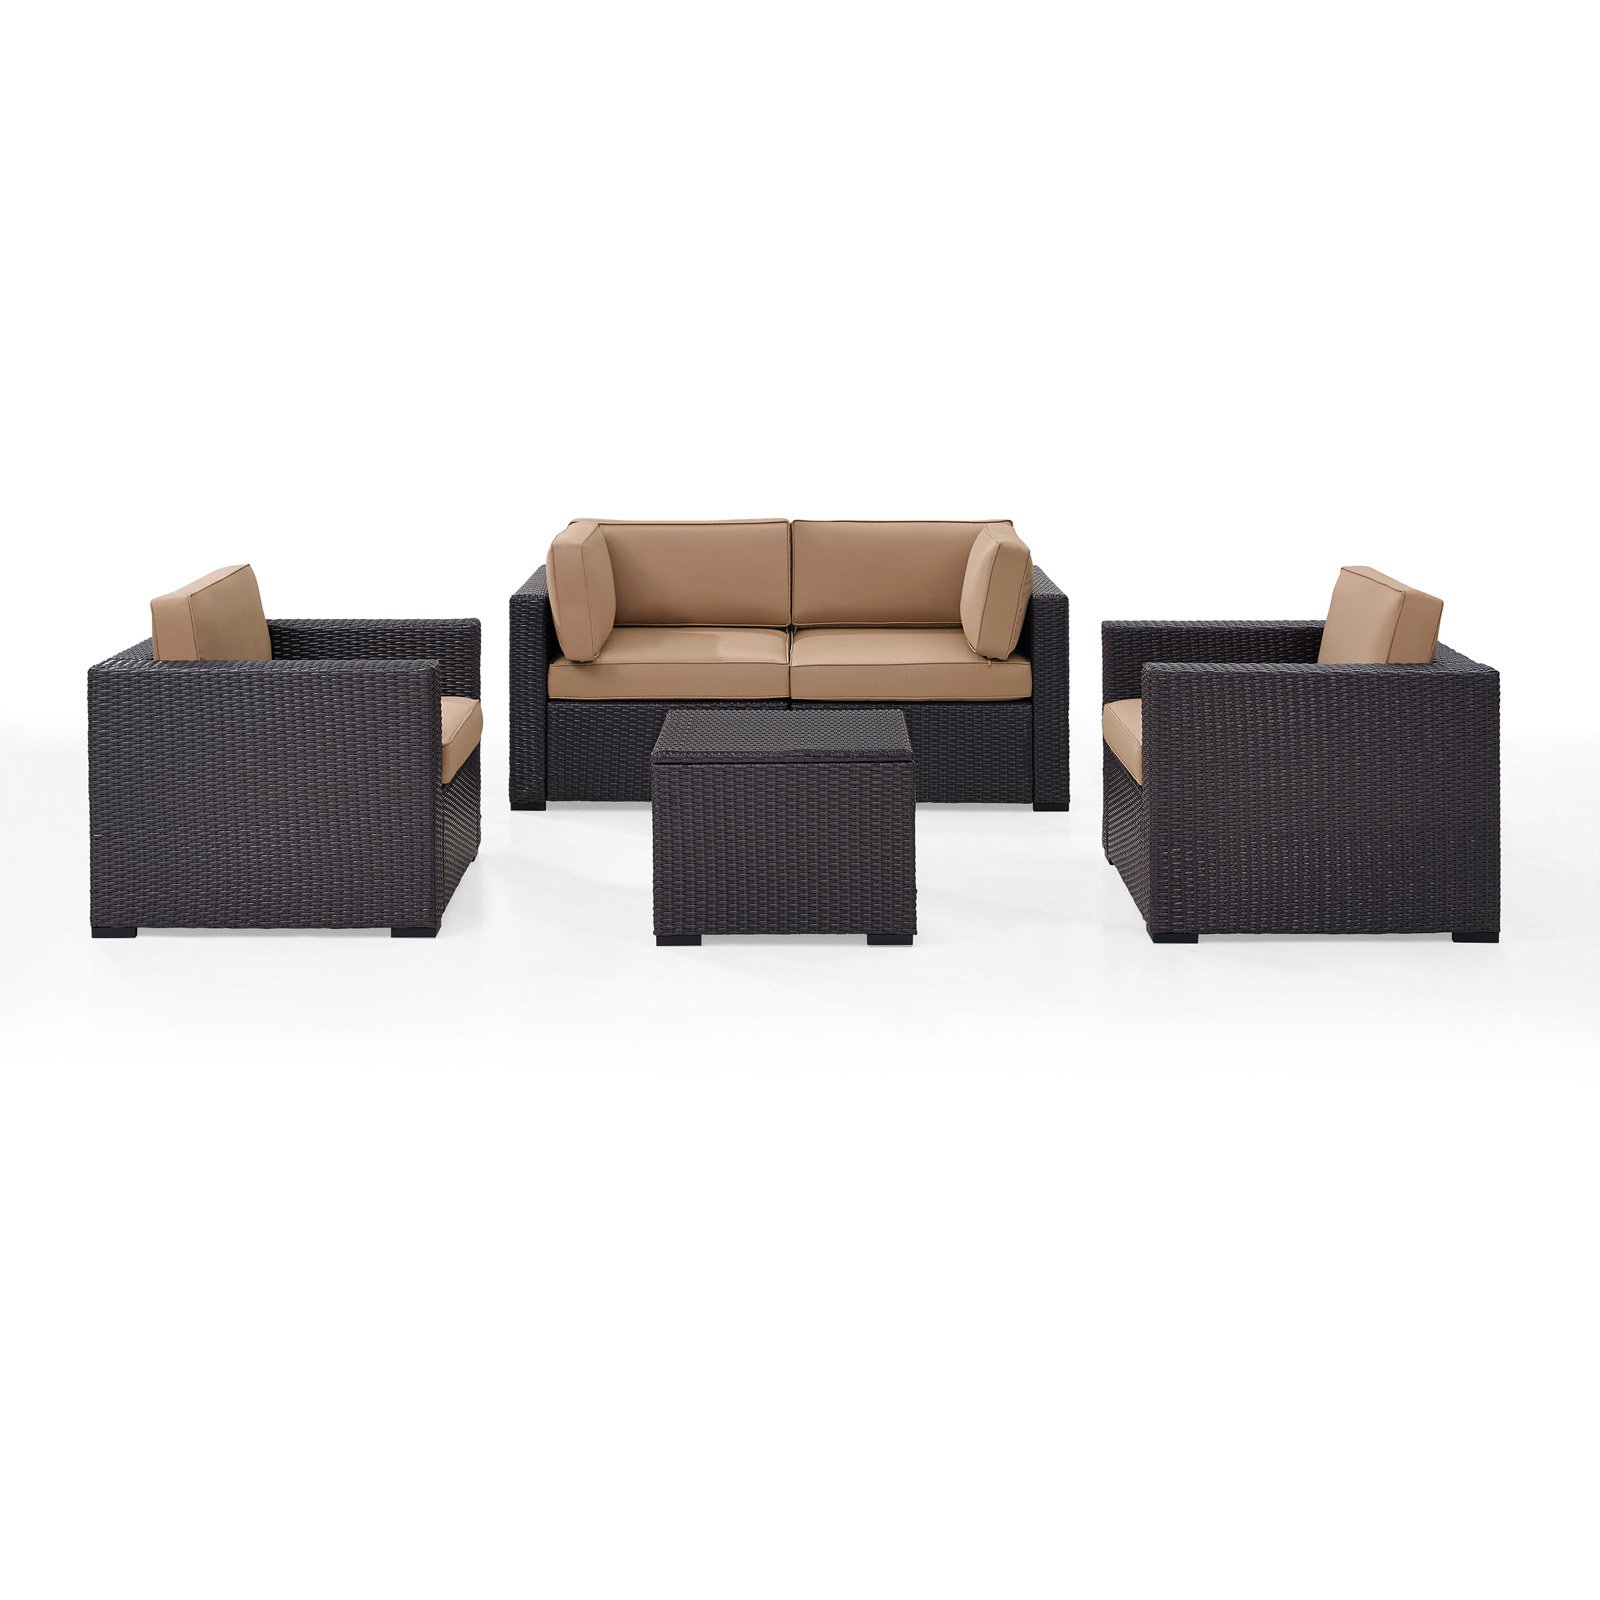 Crosley Furniture Biscayne 5 Piece Metal Patio Sofa Set in Brown/White - image 5 of 11